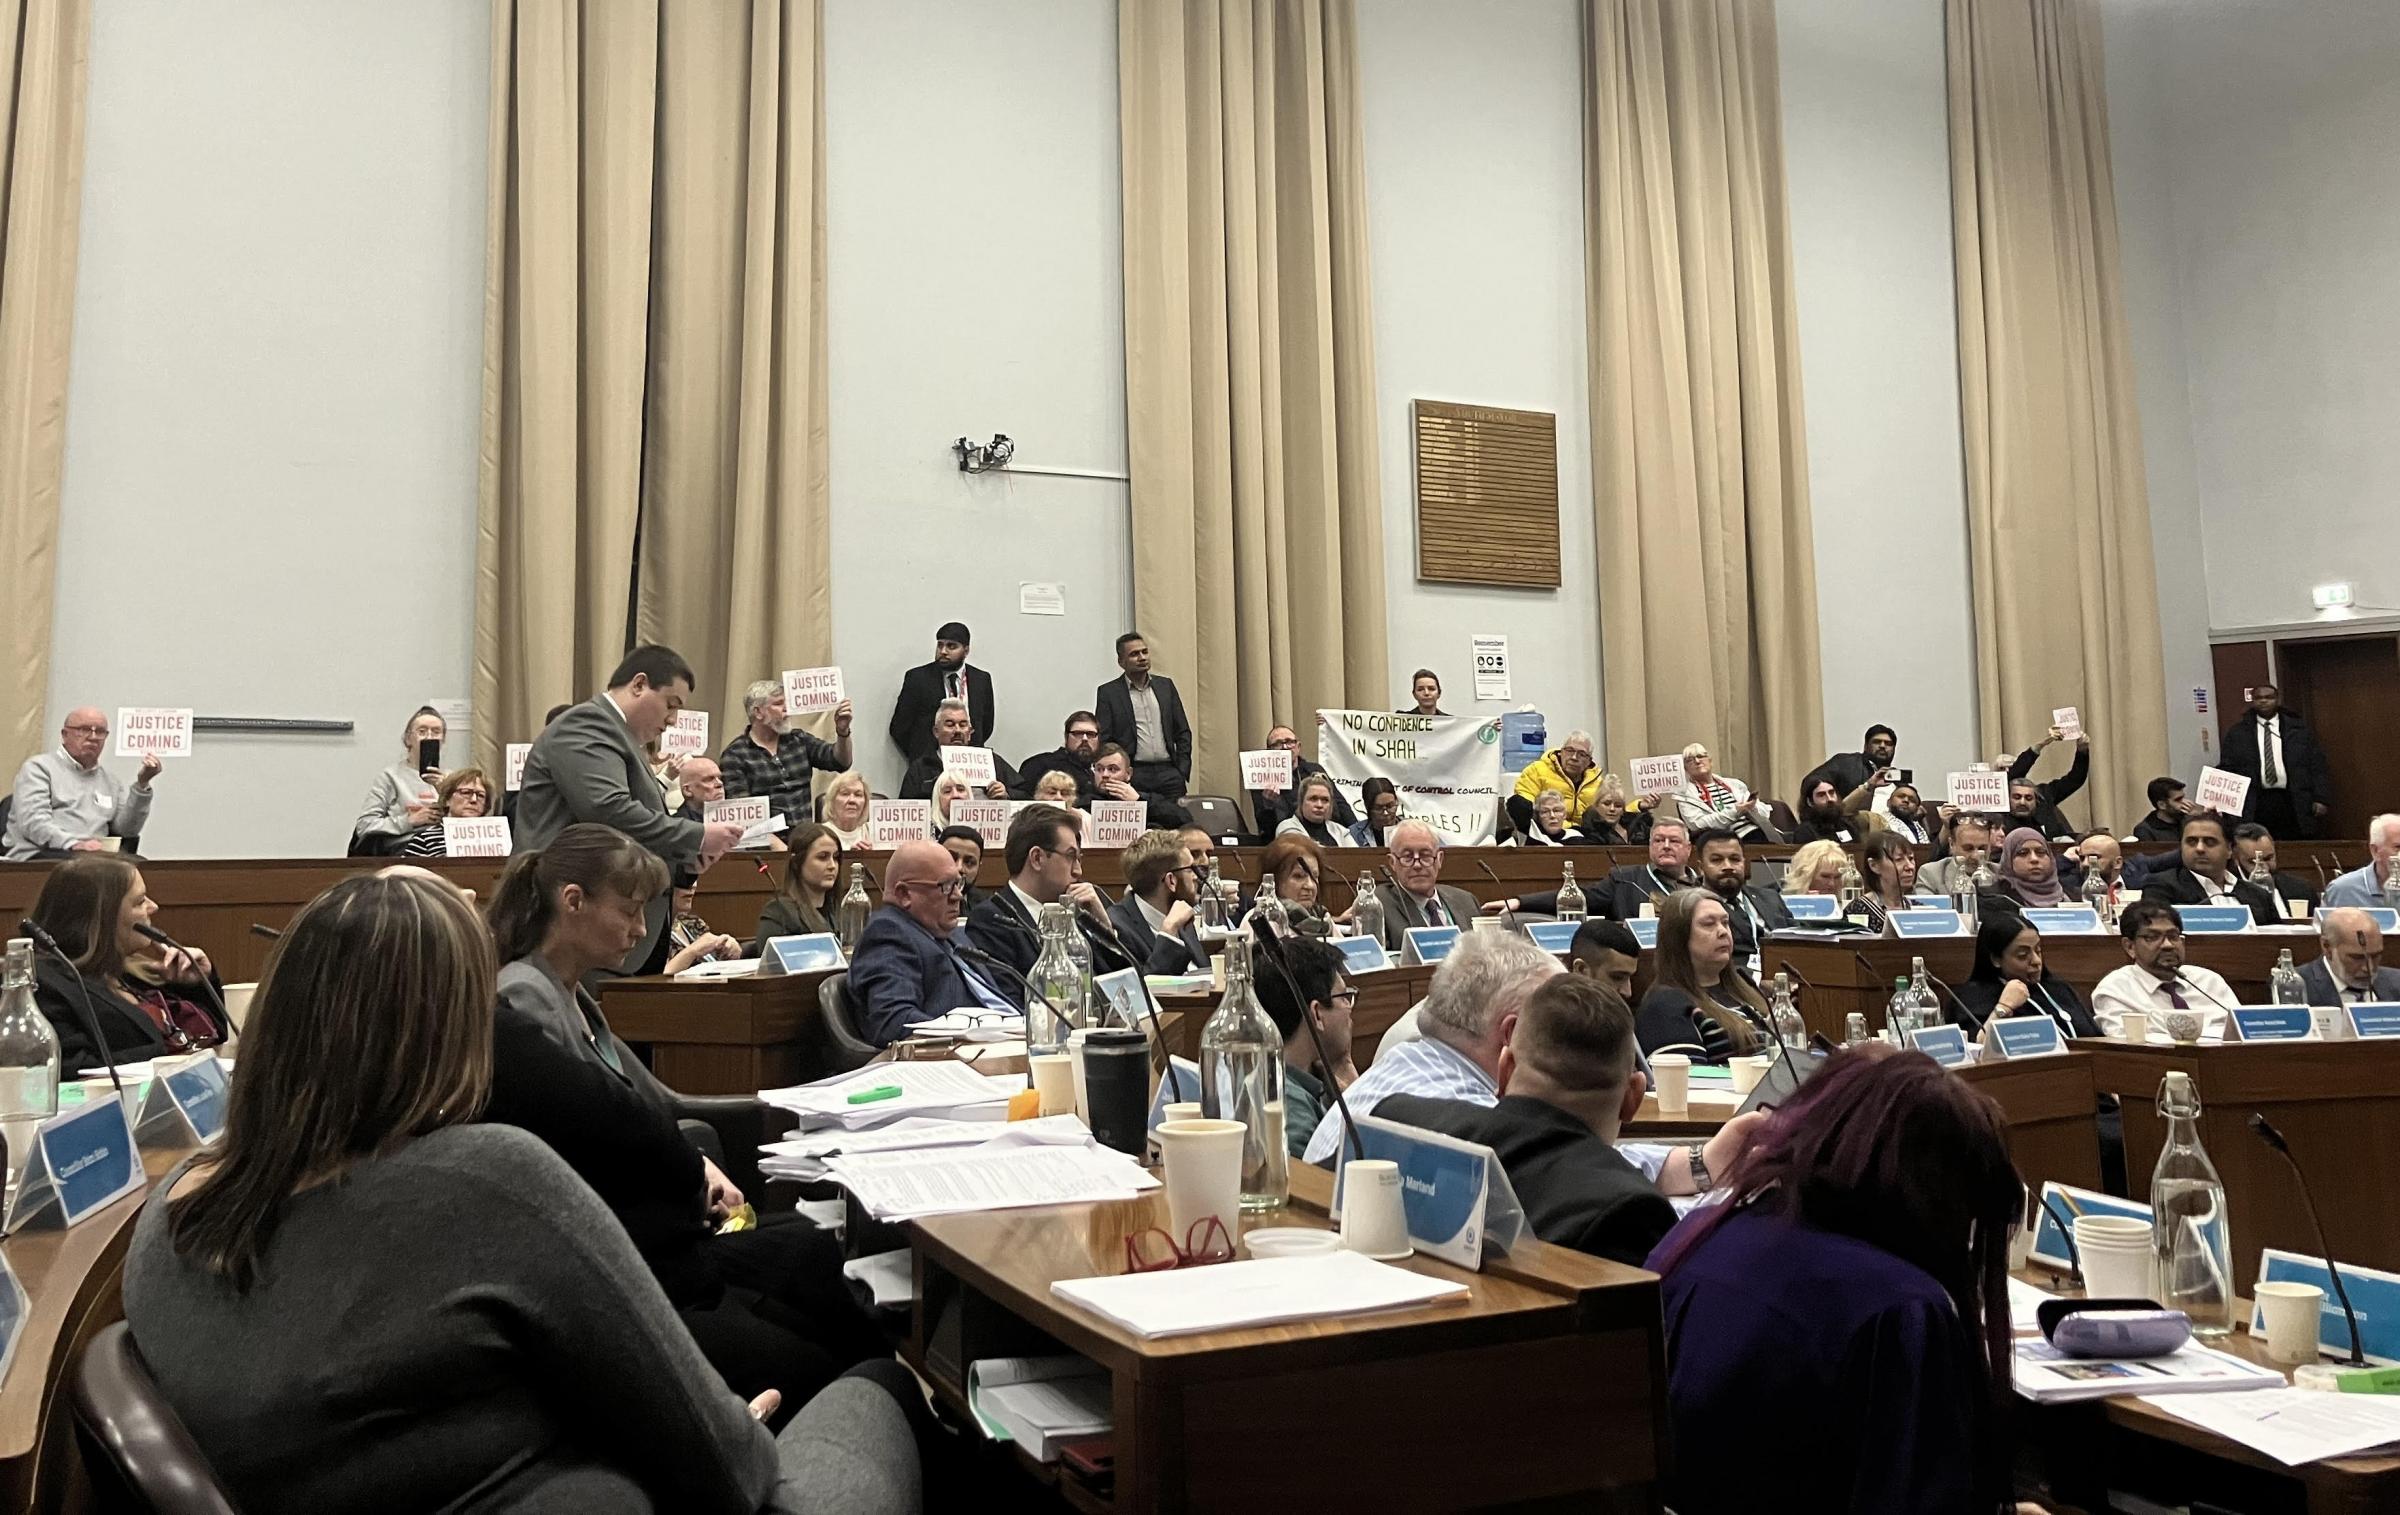 The full council meeting on March 13